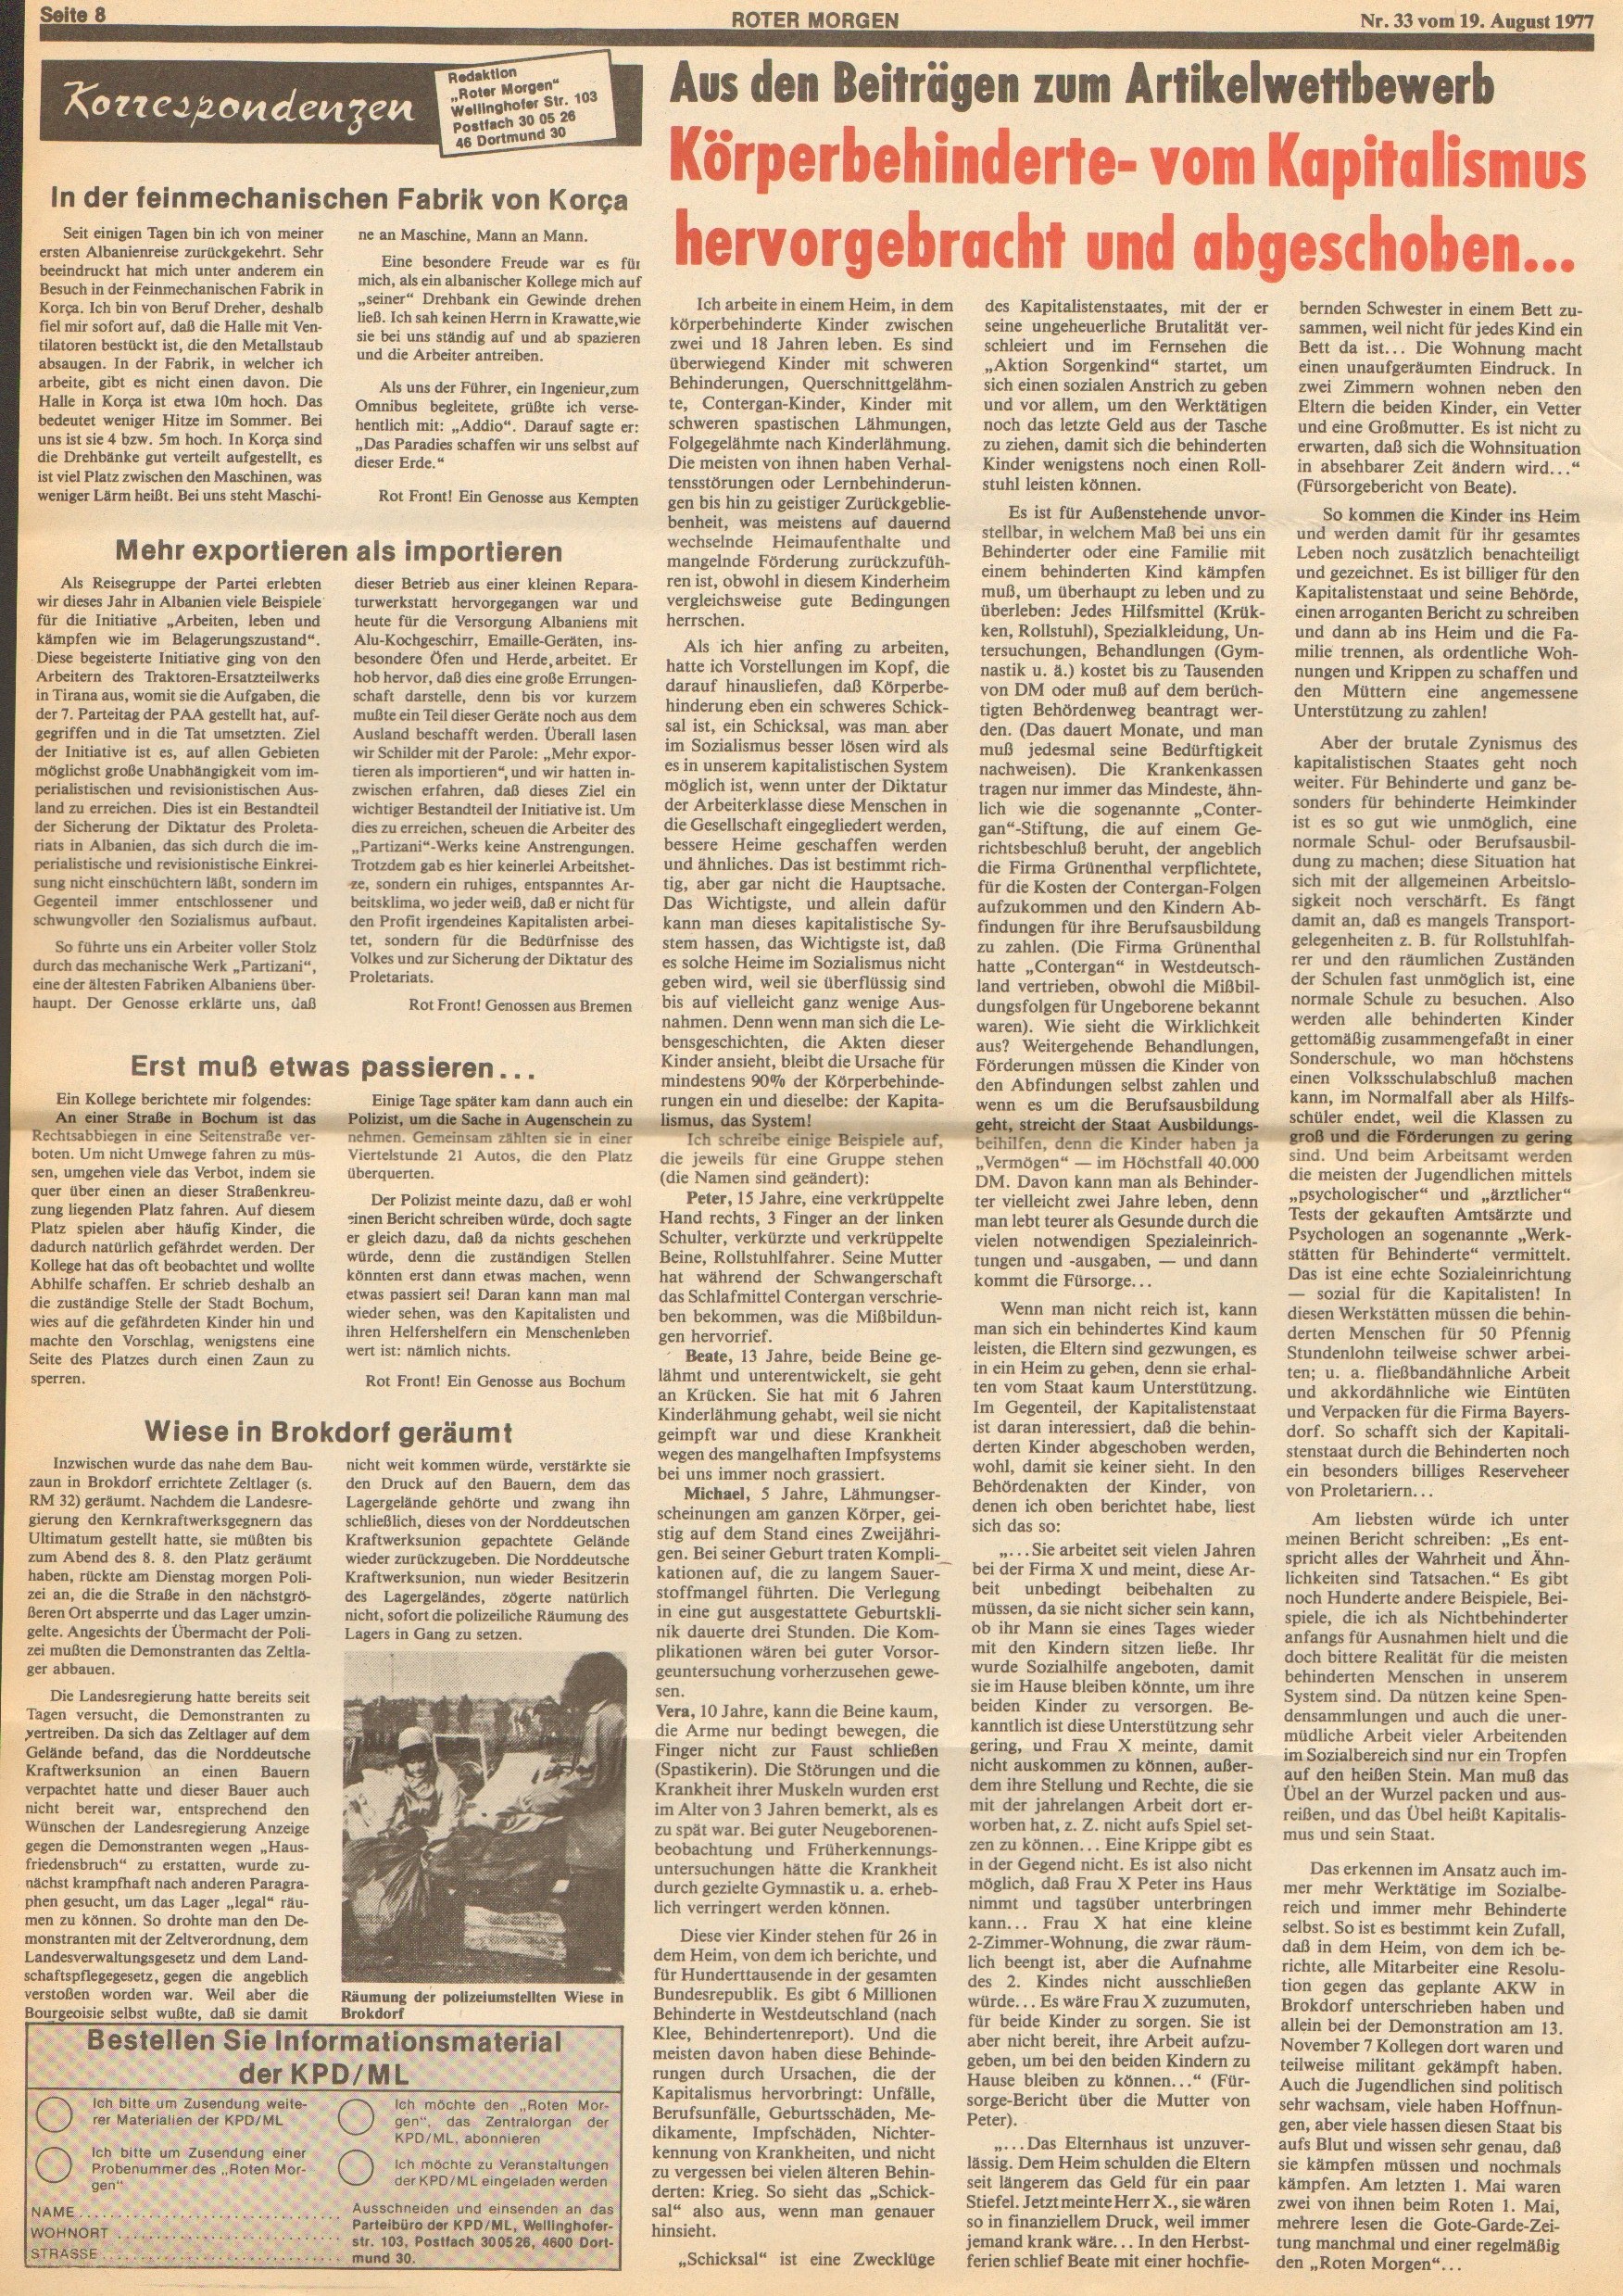 Roter Morgen, 11. Jg., 19. August 1977, Nr. 33, Seite 8